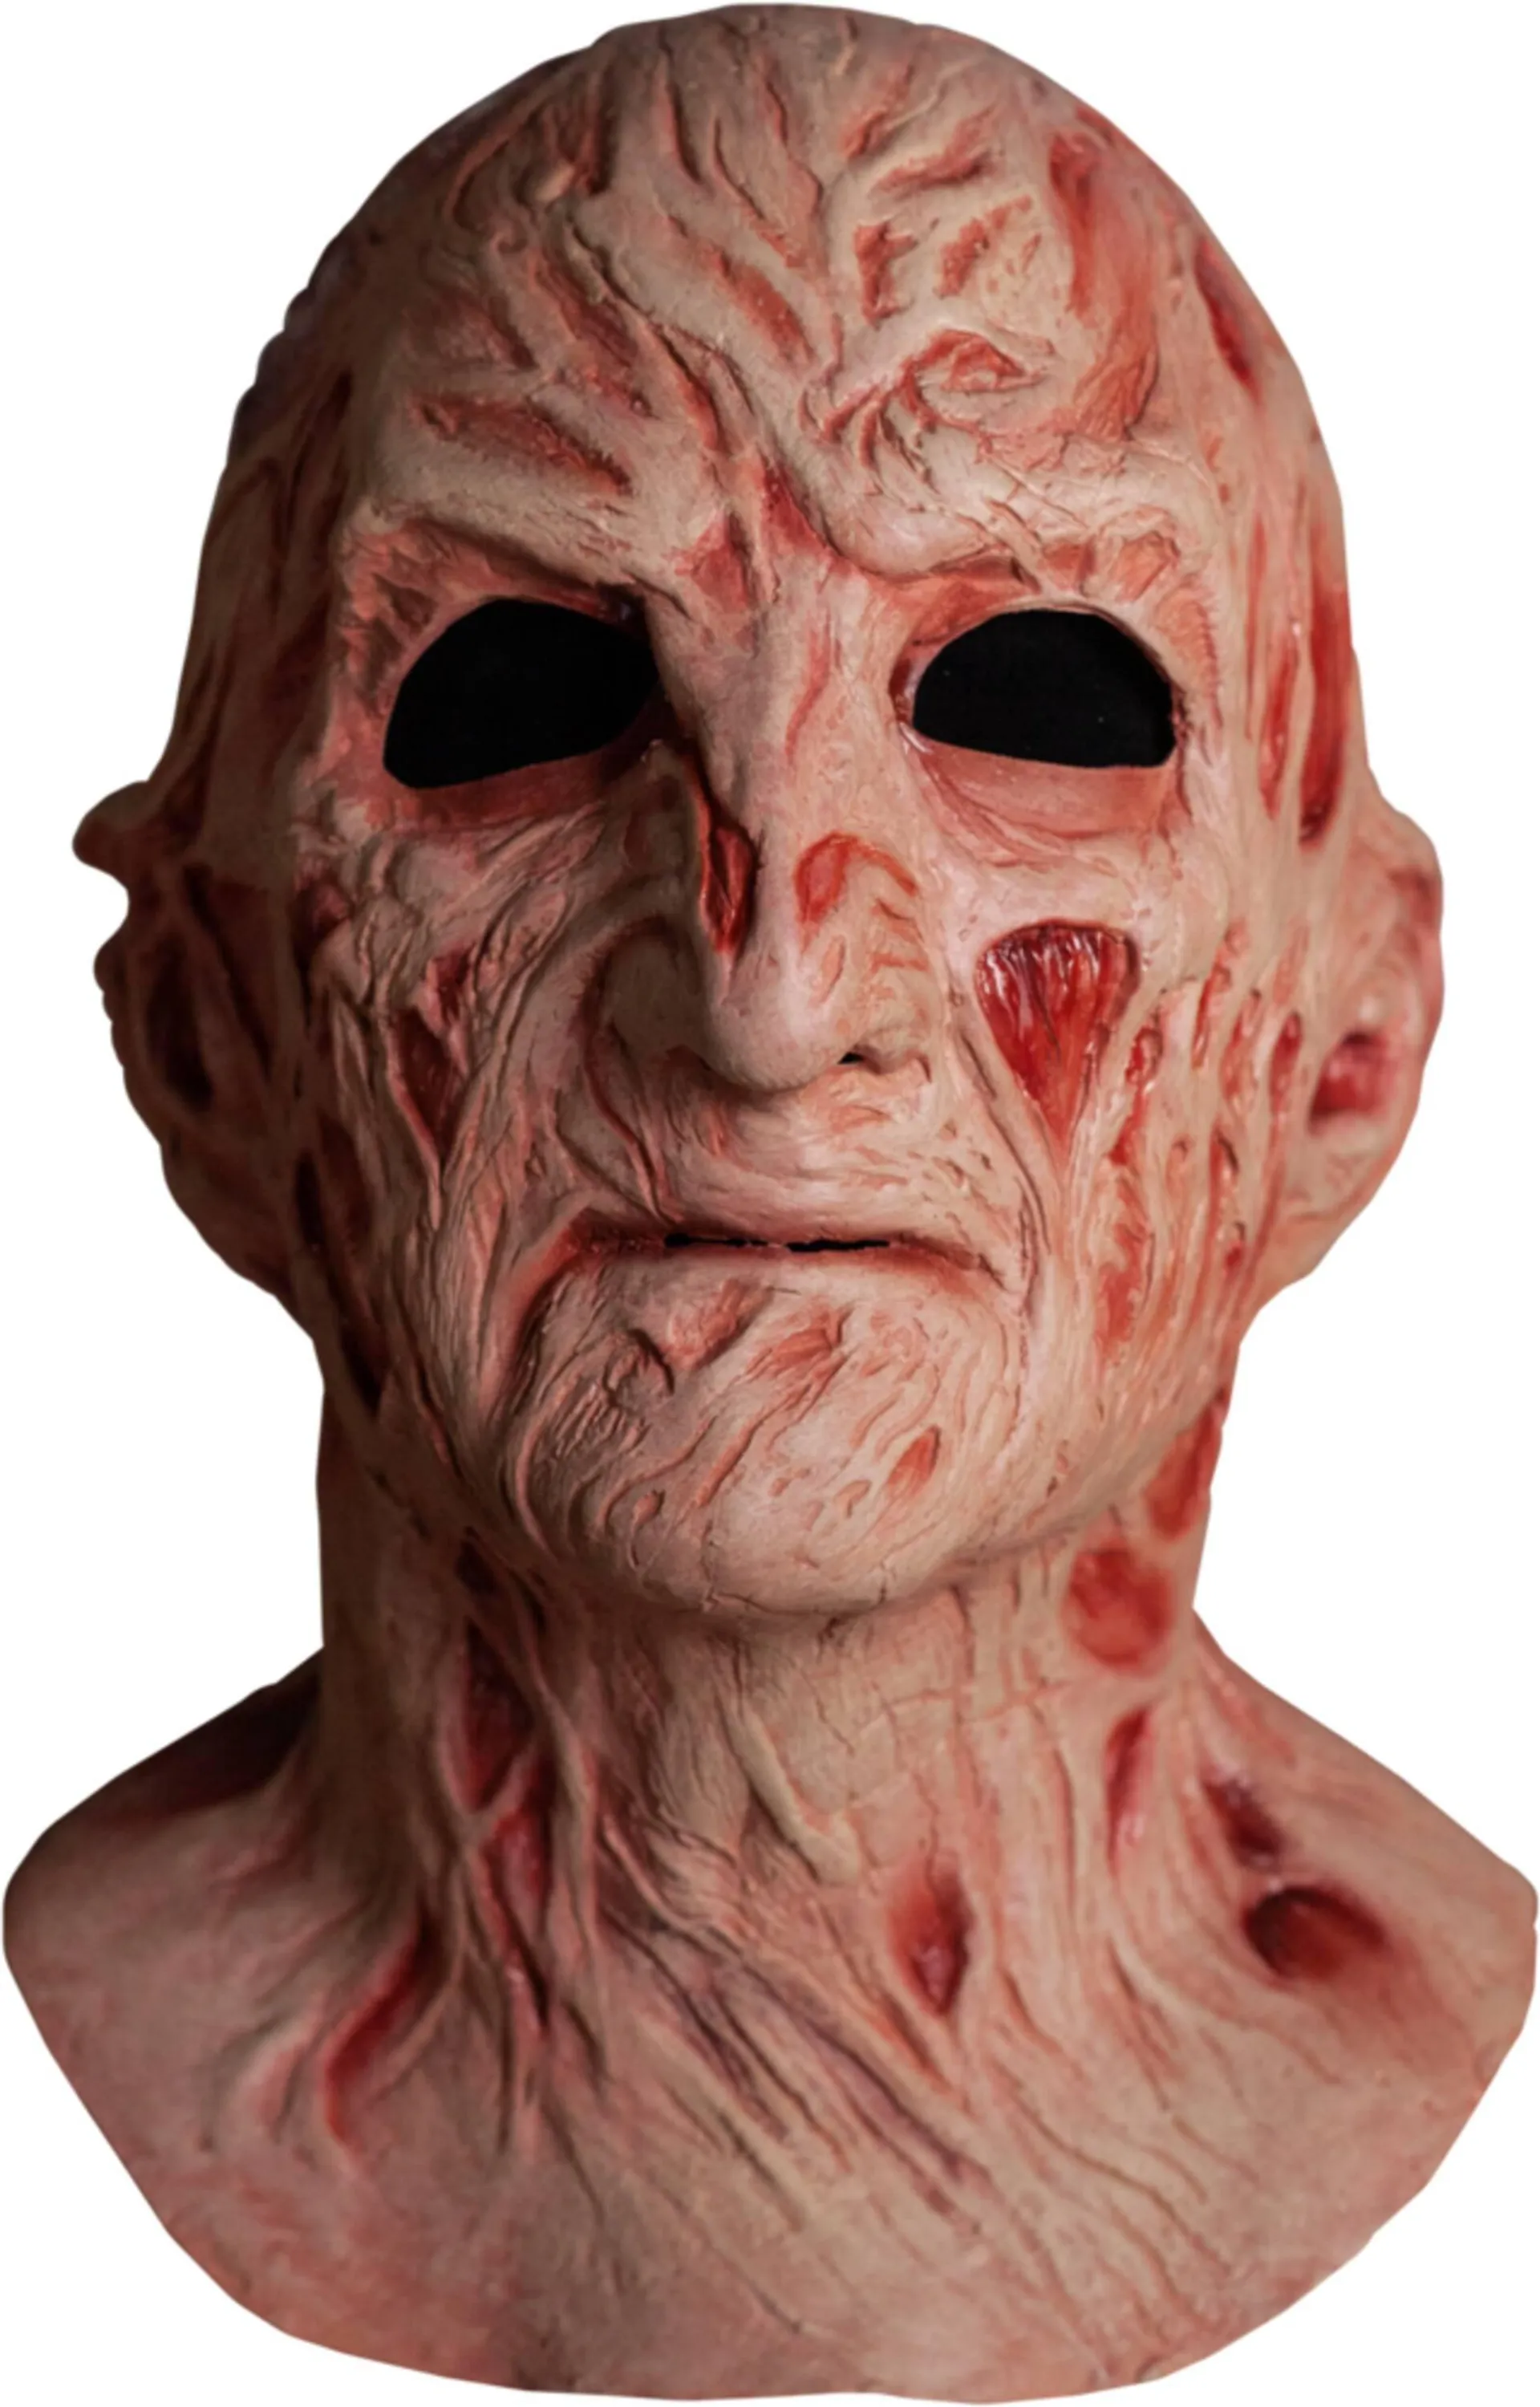 A Nightmare on Elm Street Freddy Kruger Burn Scars Latex Mask, Beige/Red, One Size, Wearable Costume Accessory for Halloween